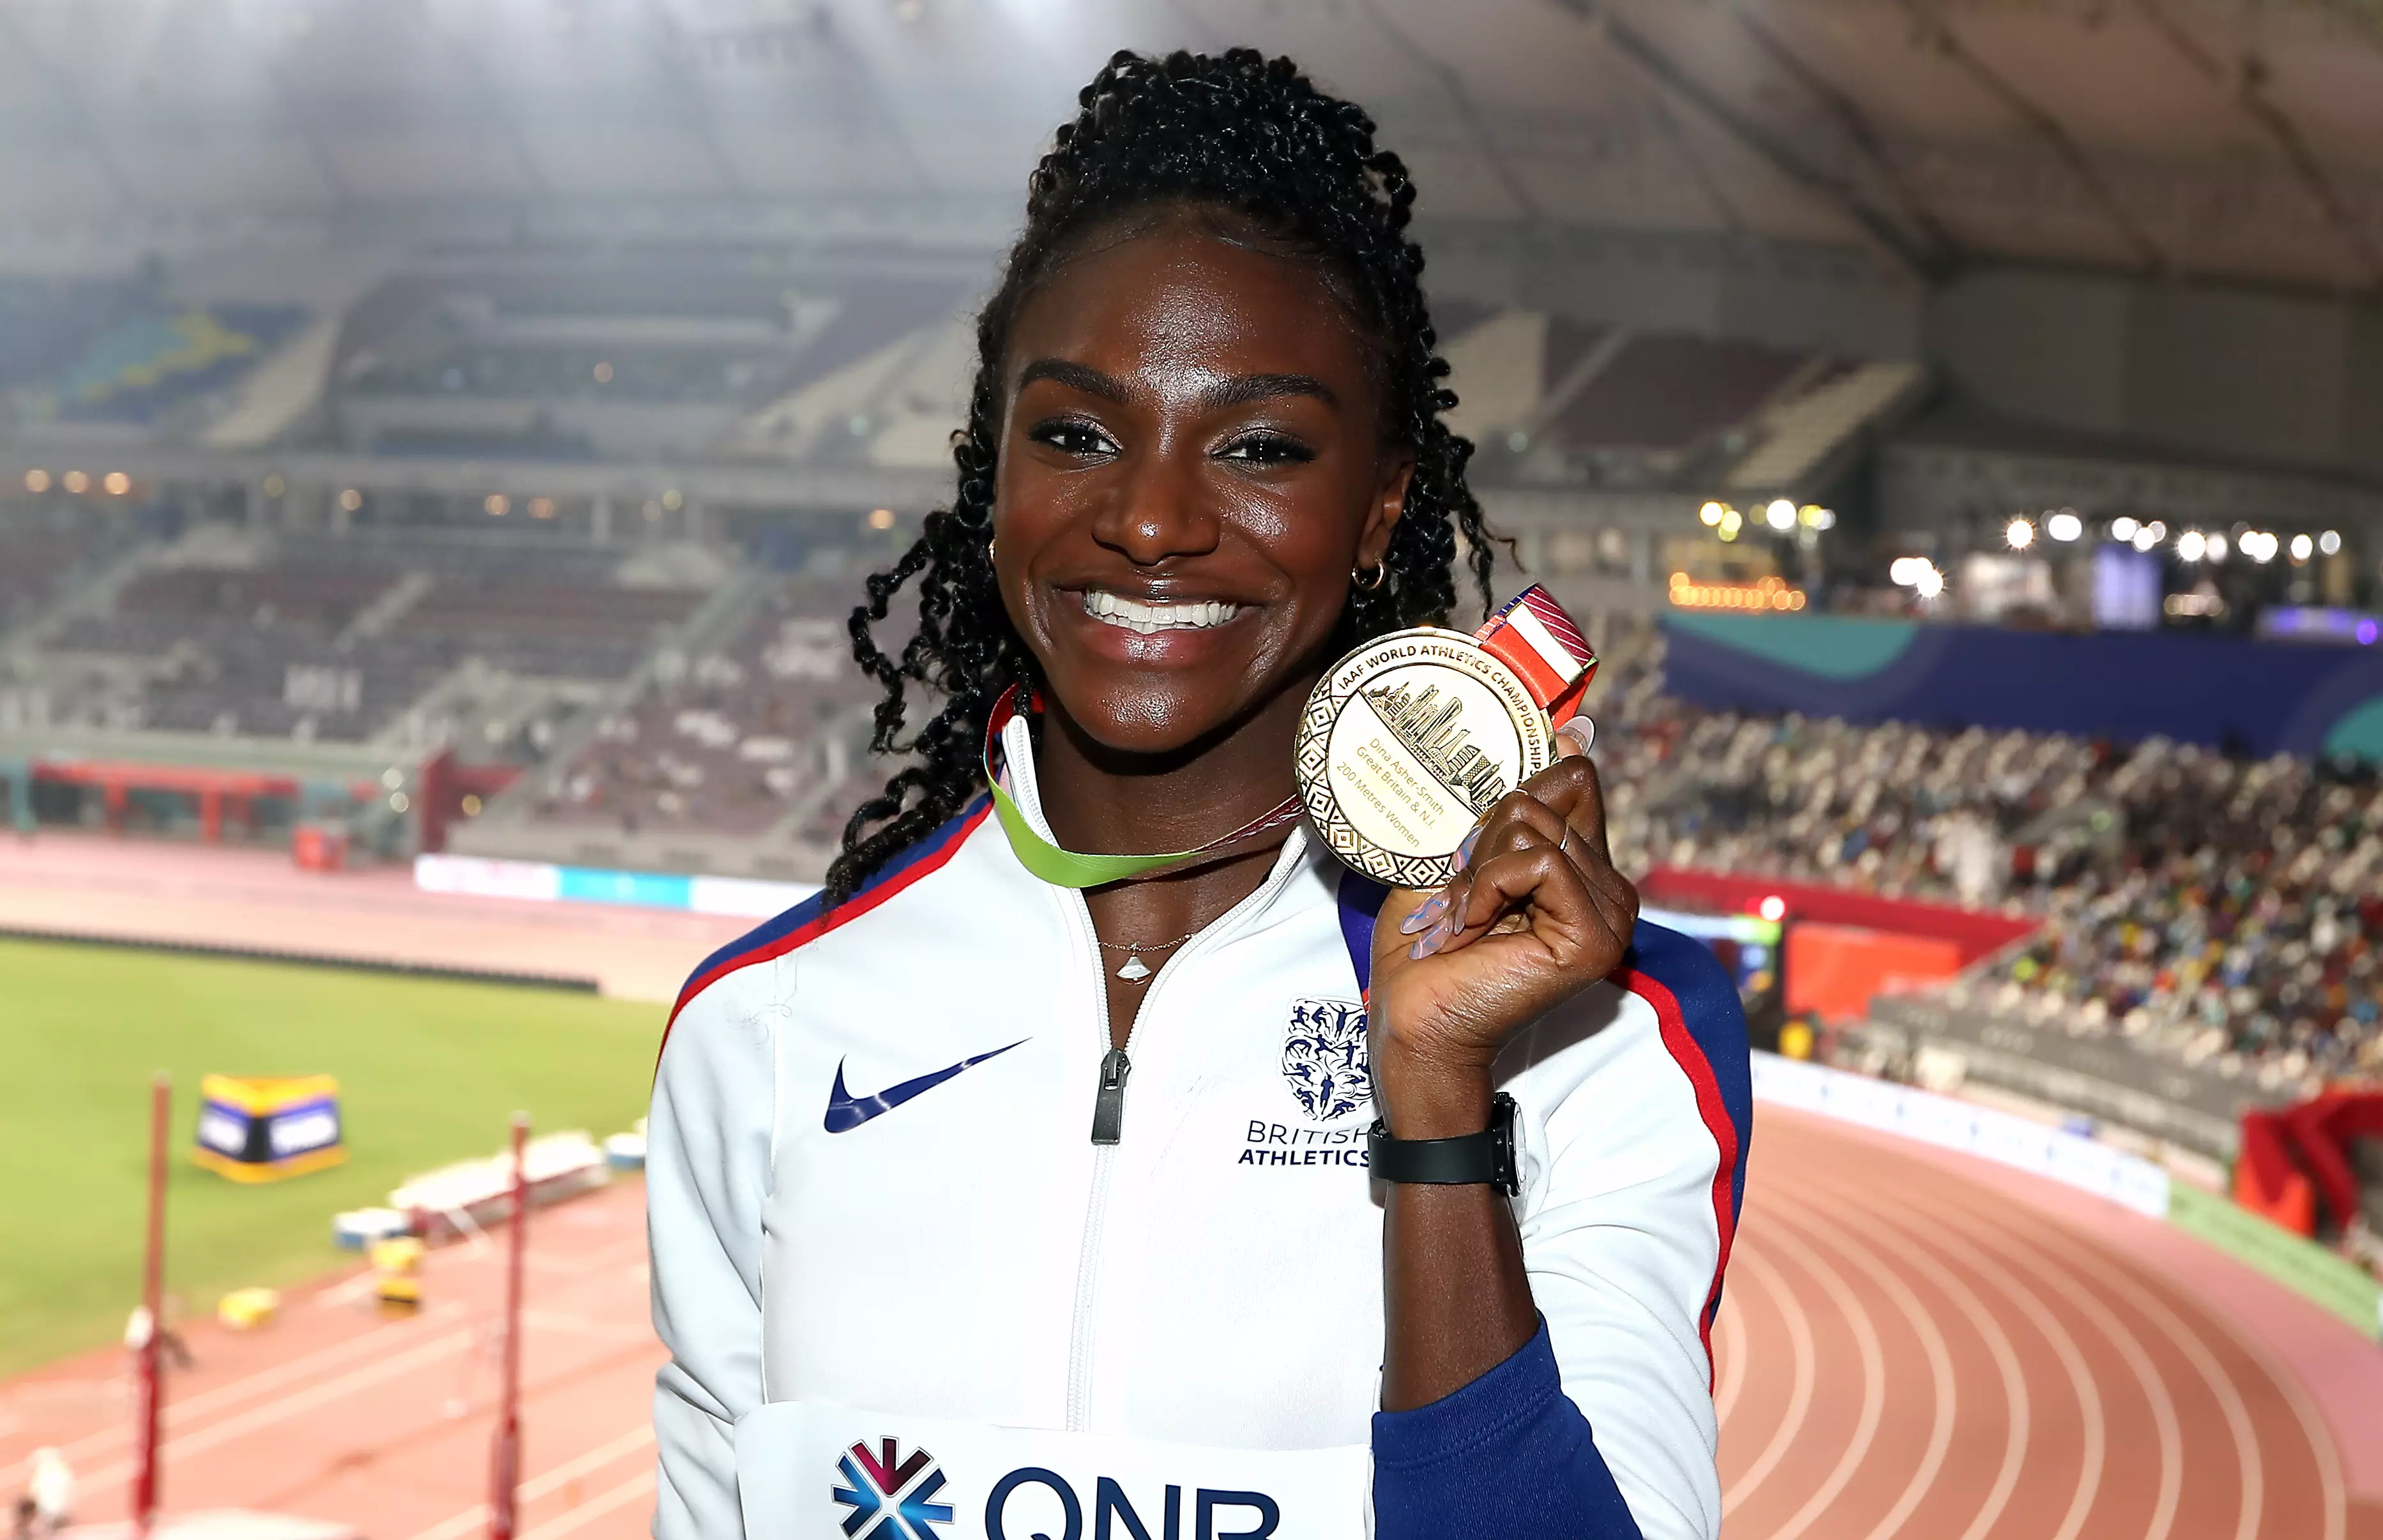 Dina Asher-Smith receives her gold medal for the Women's 200m Final during day seven of the IAAF World Championships in Doha, 2019. (